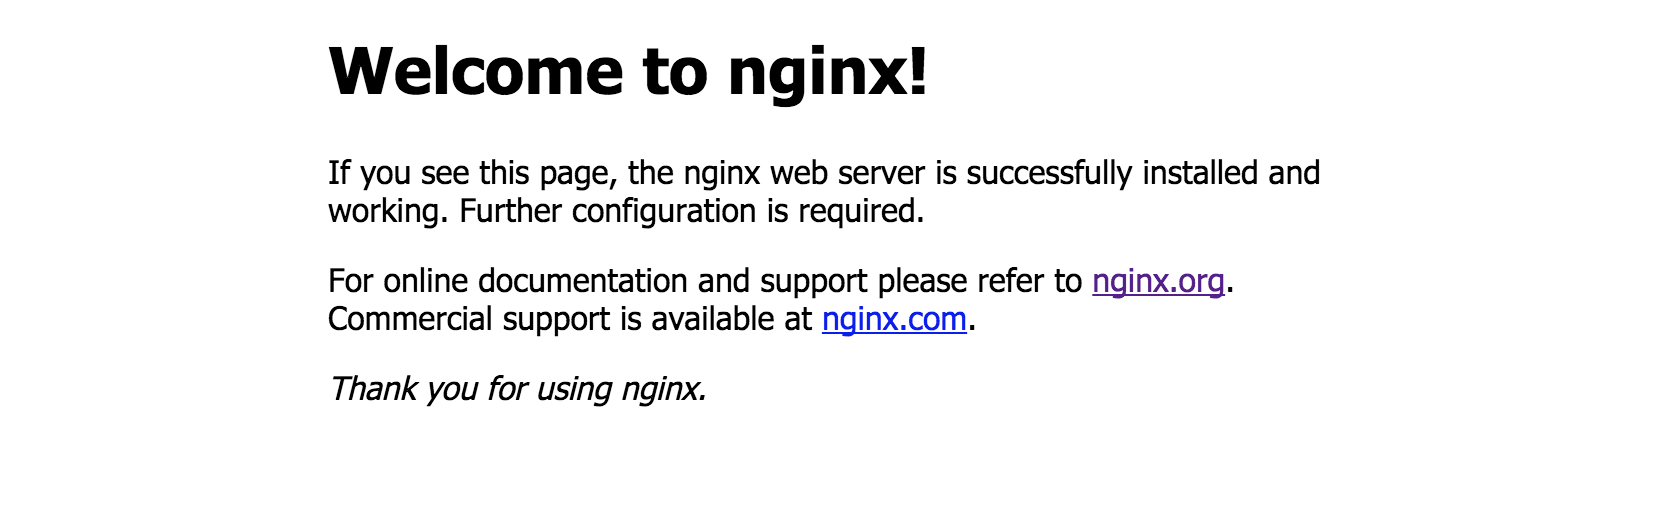 Welcome to nginx page